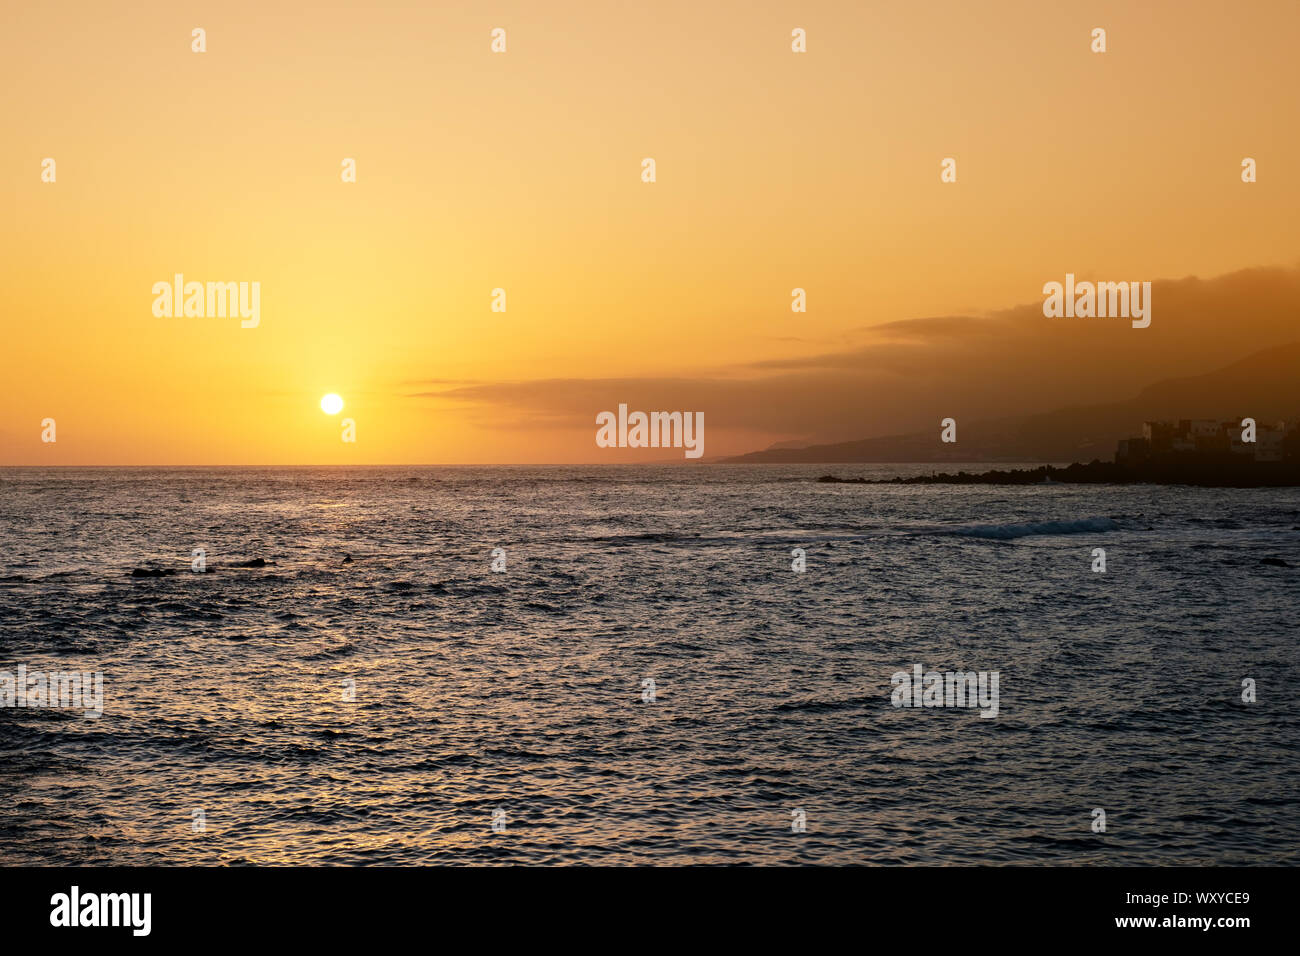 ocean horizon with sunset sky background, evening sky over water Stock Photo